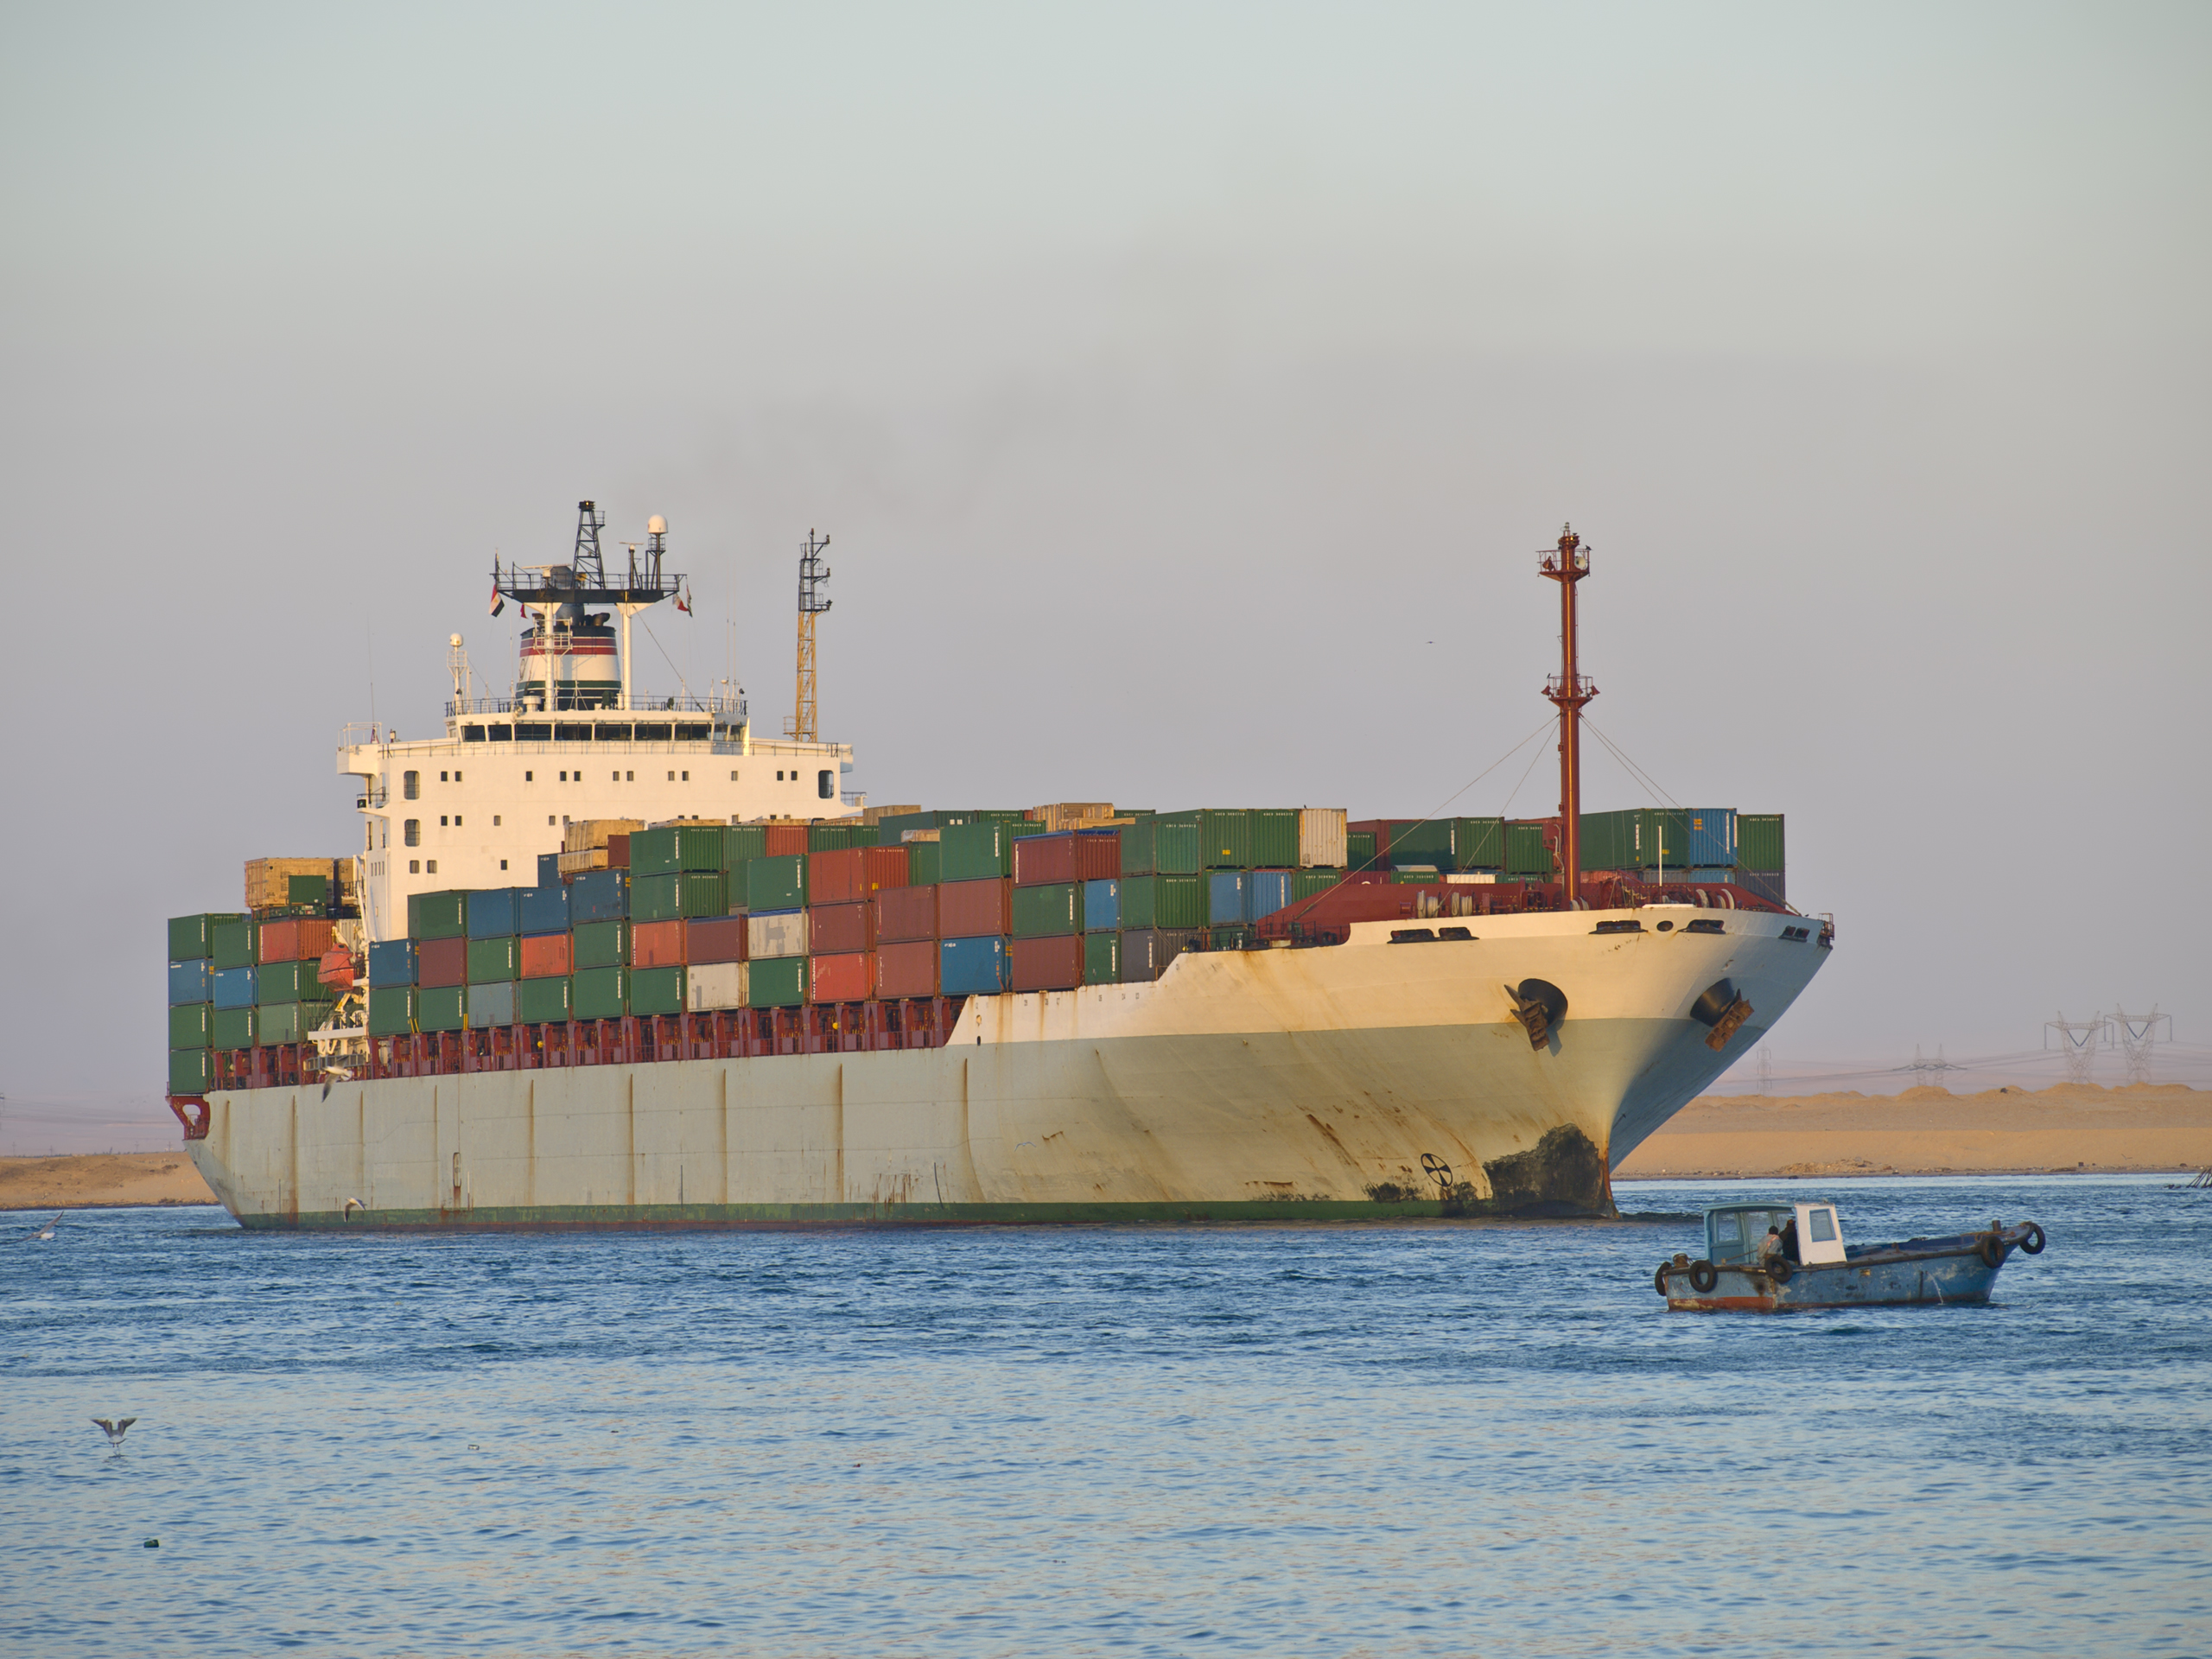 Transport ship passing through the Suez Canal in Egypt